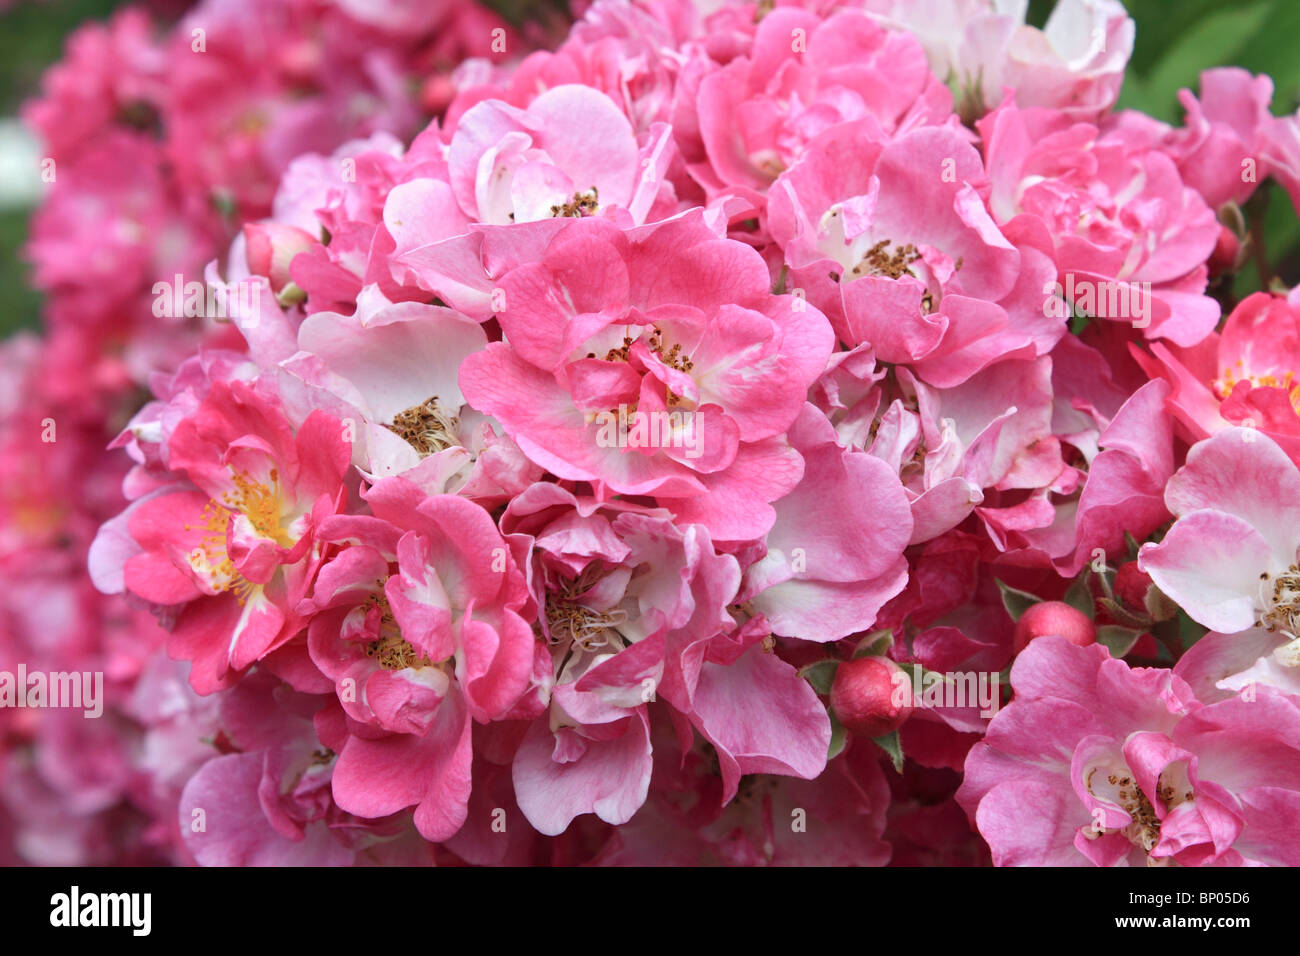 Tightly bunched flowers of pink climbing rose, Surrey England UK Stock Photo